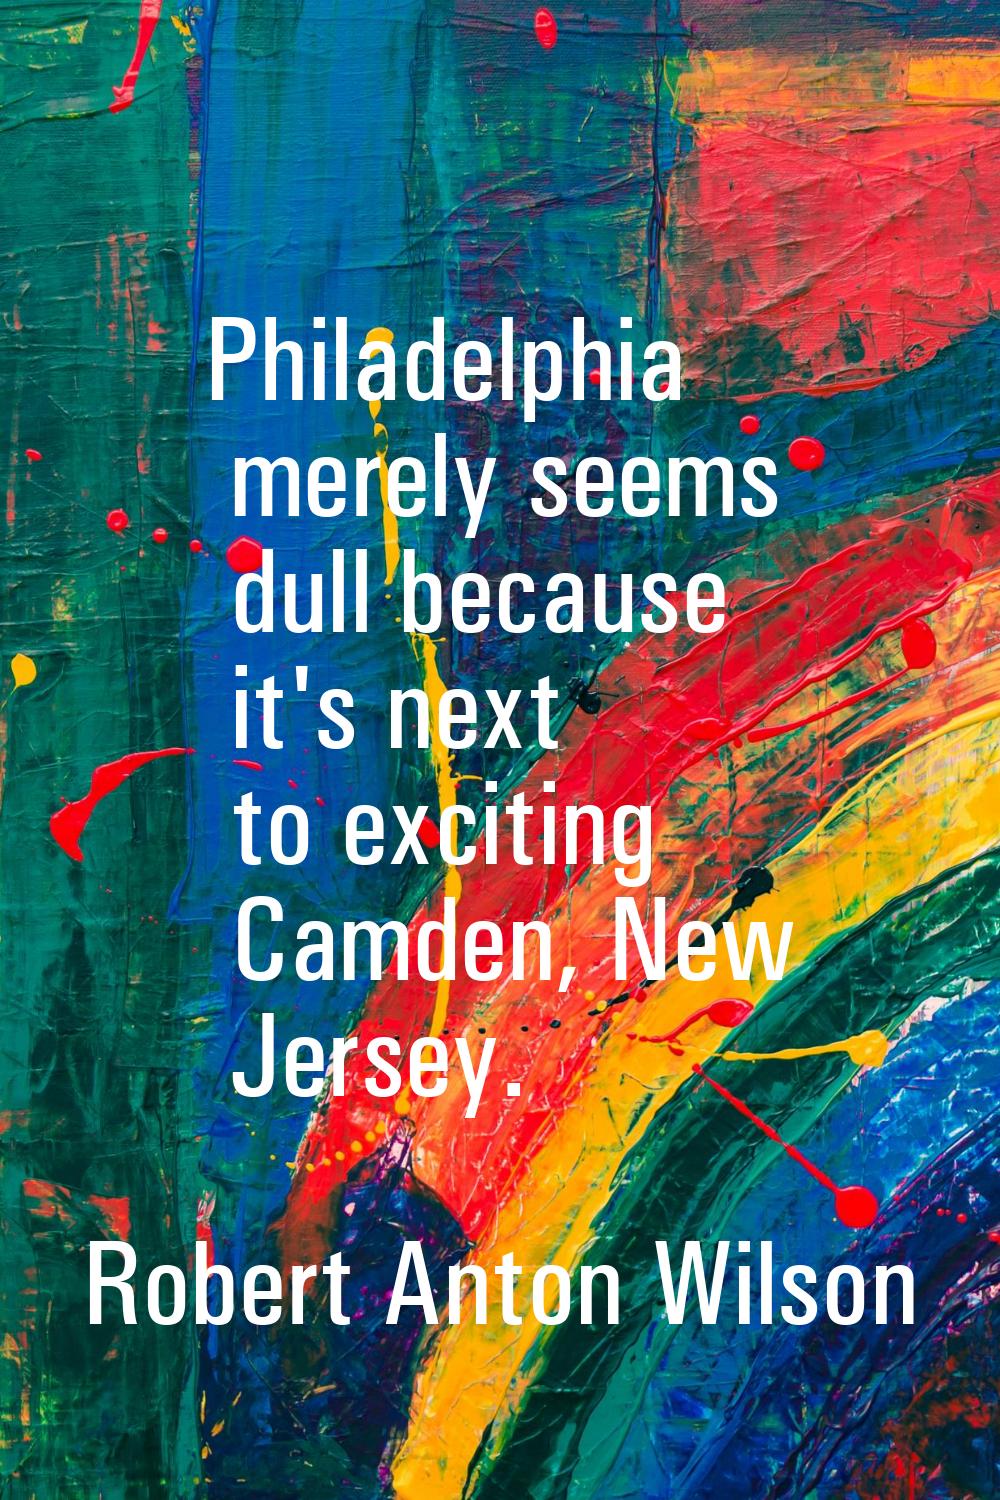 Philadelphia merely seems dull because it's next to exciting Camden, New Jersey.